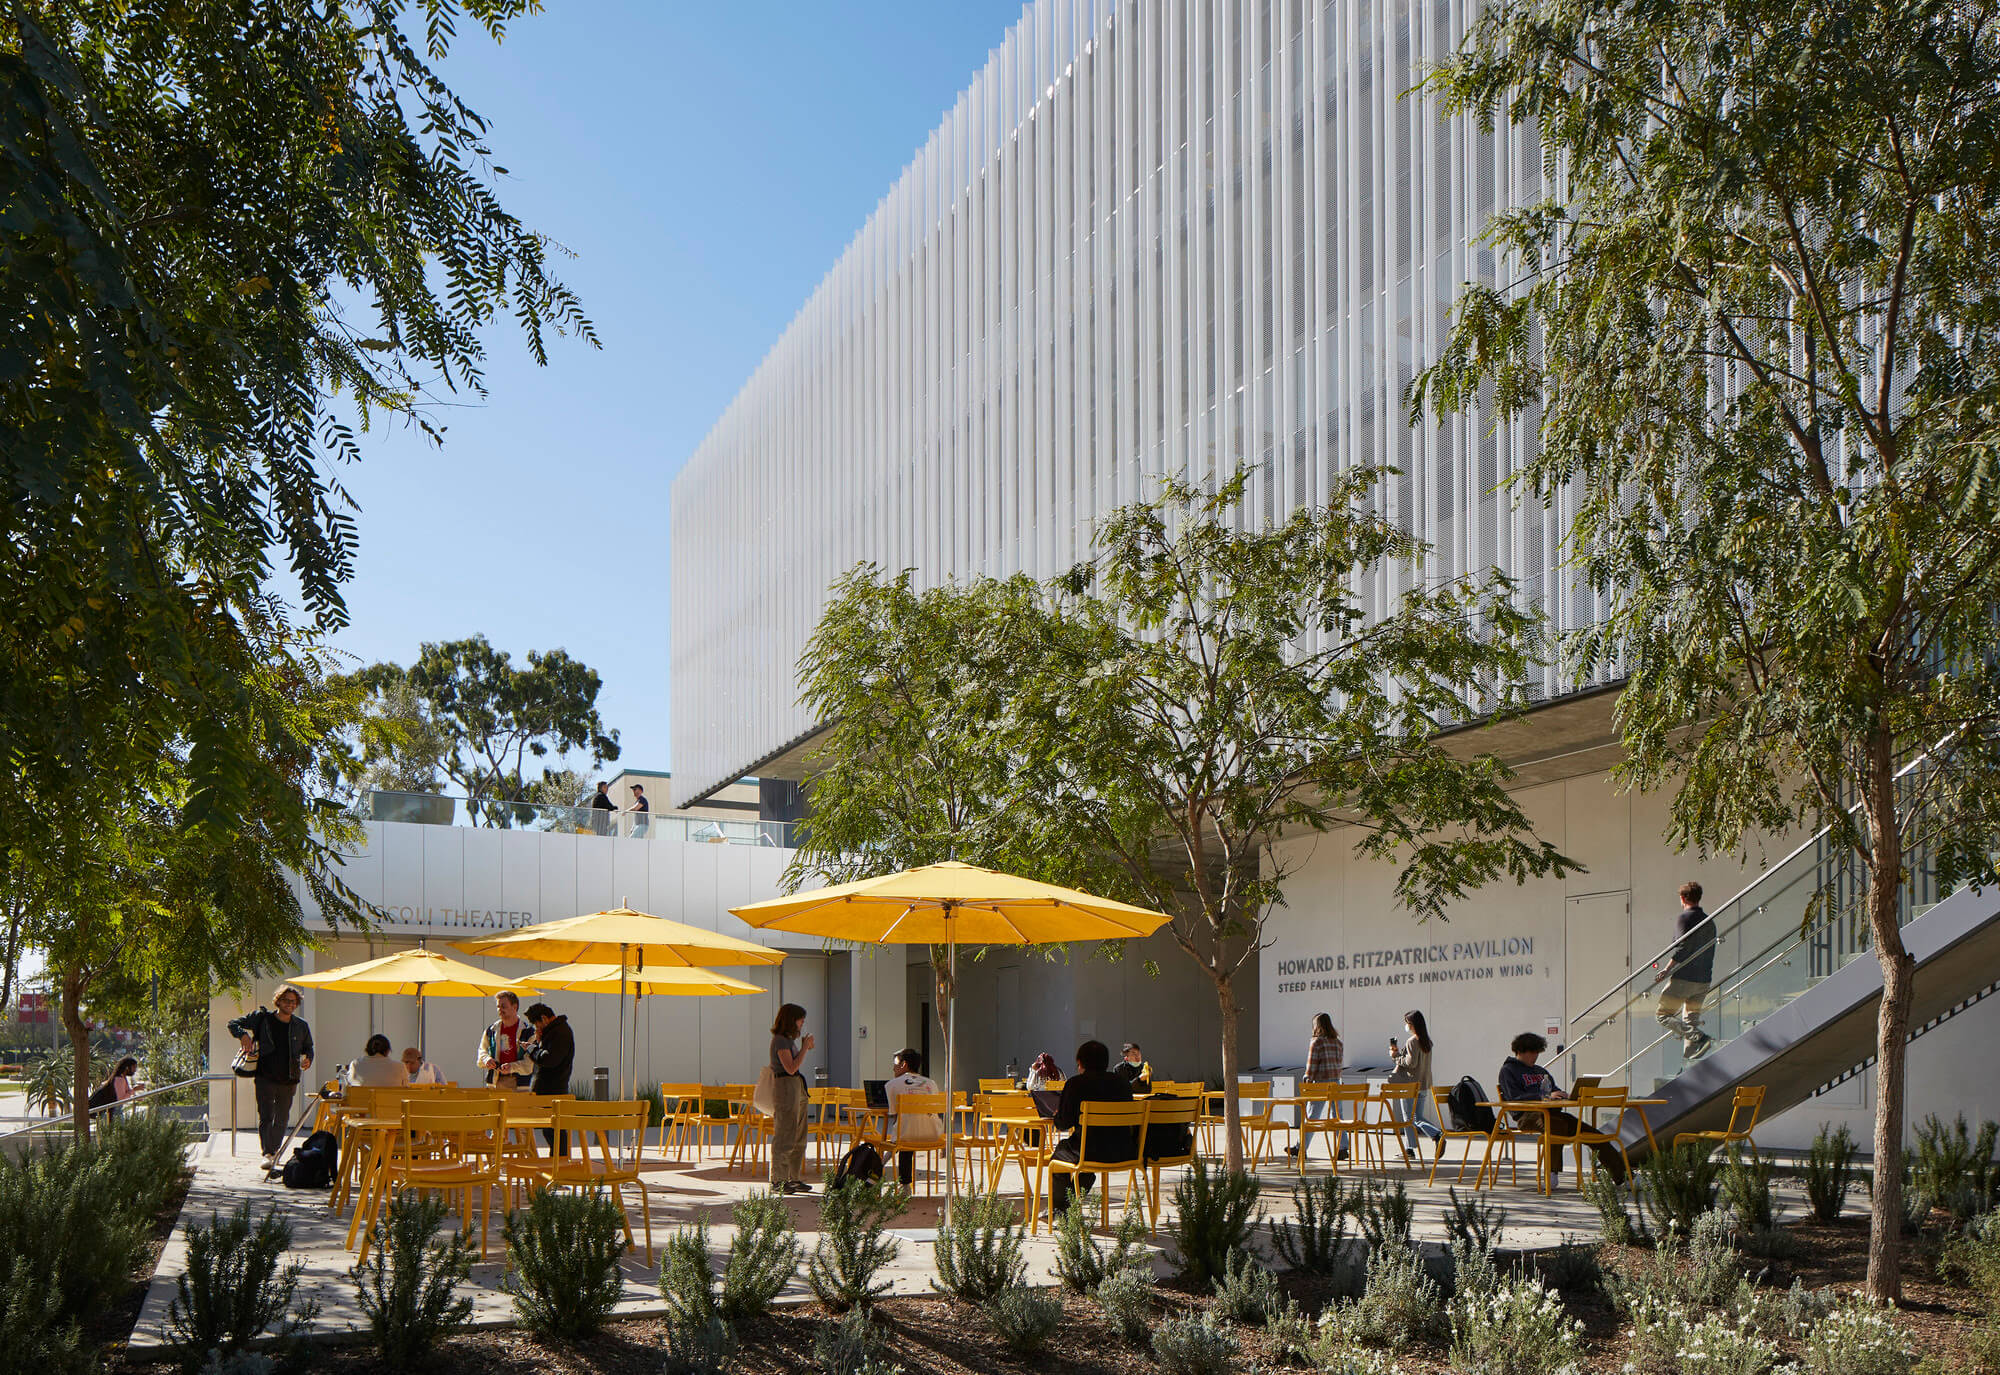 yellow umbrellas lining patio in front of new building